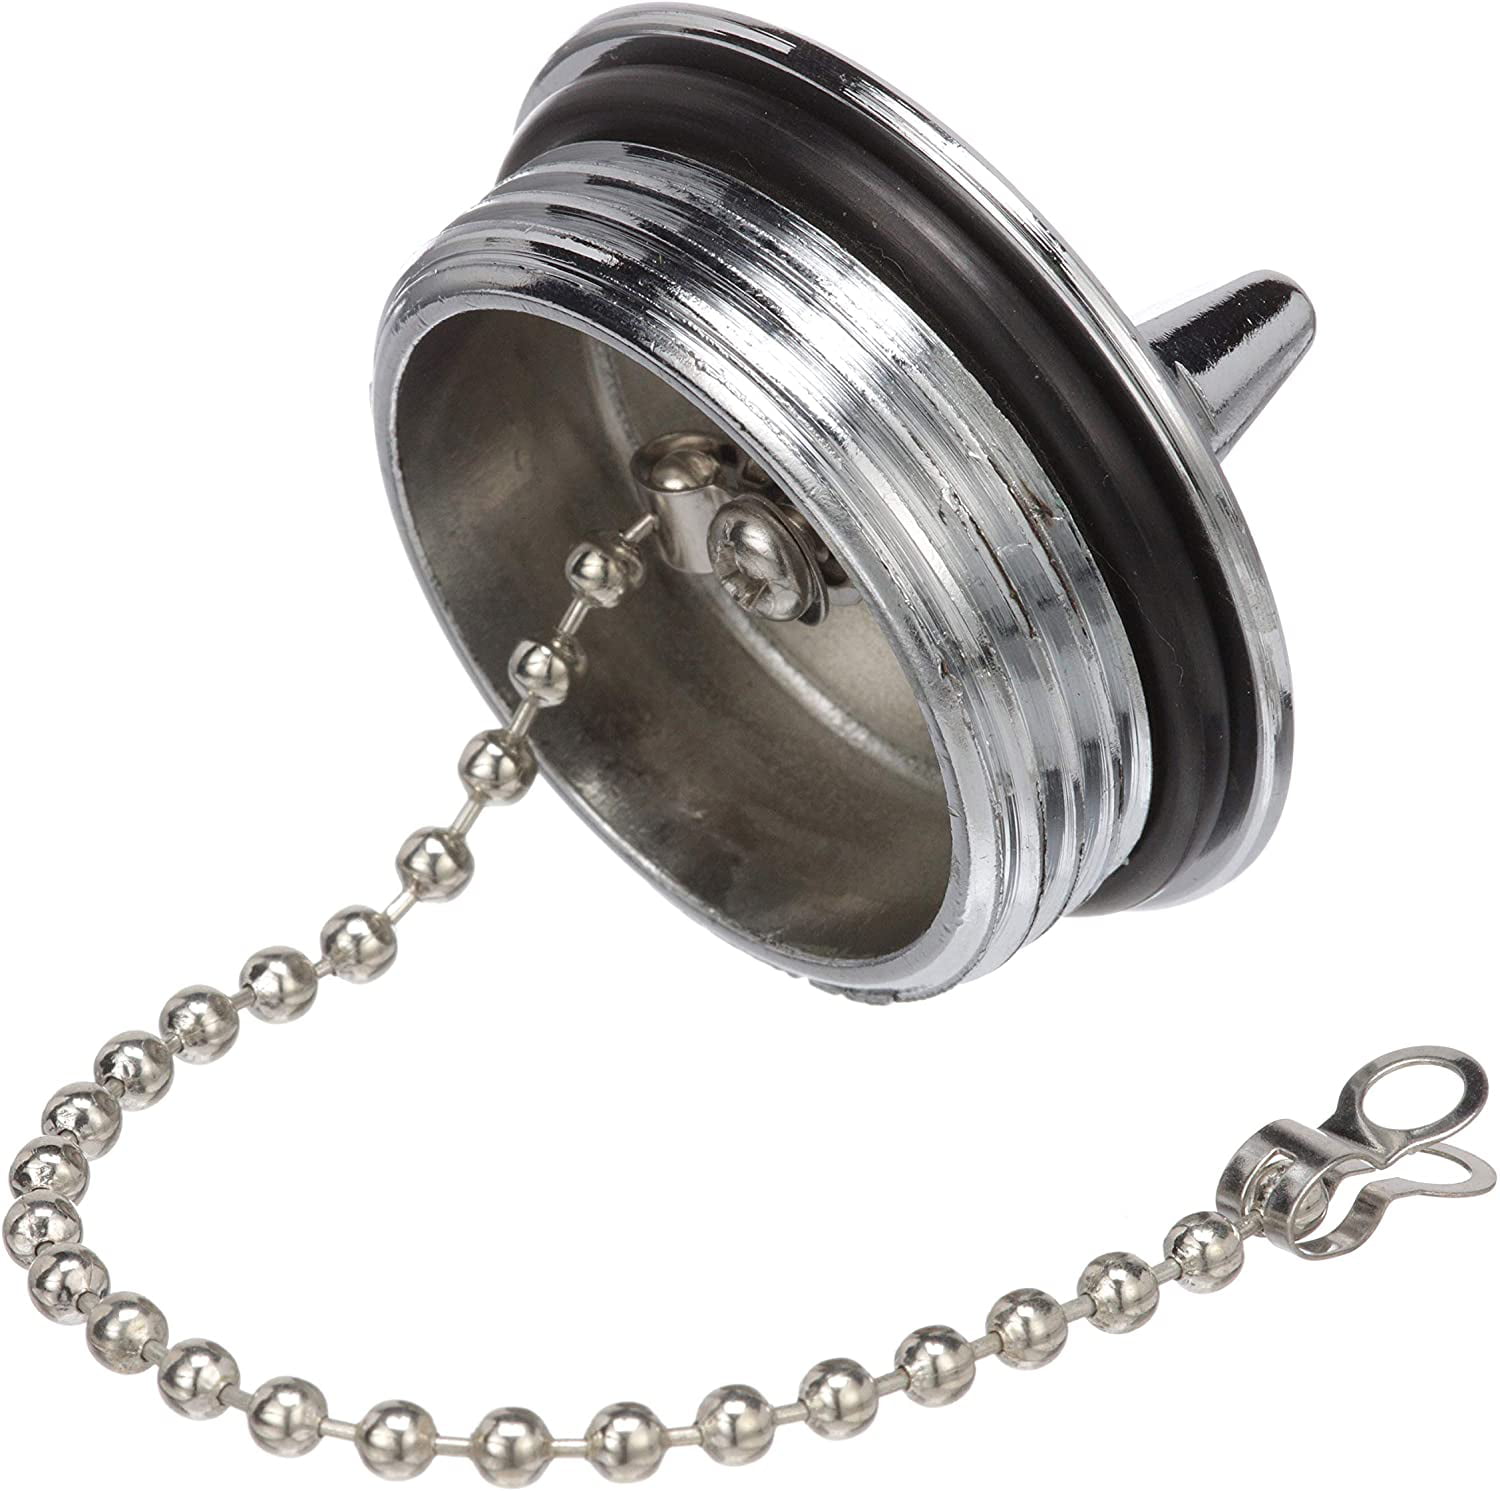 Gas Deck Fill Replacement Spare Cap with Chain Boat Marine Yacht Accessories